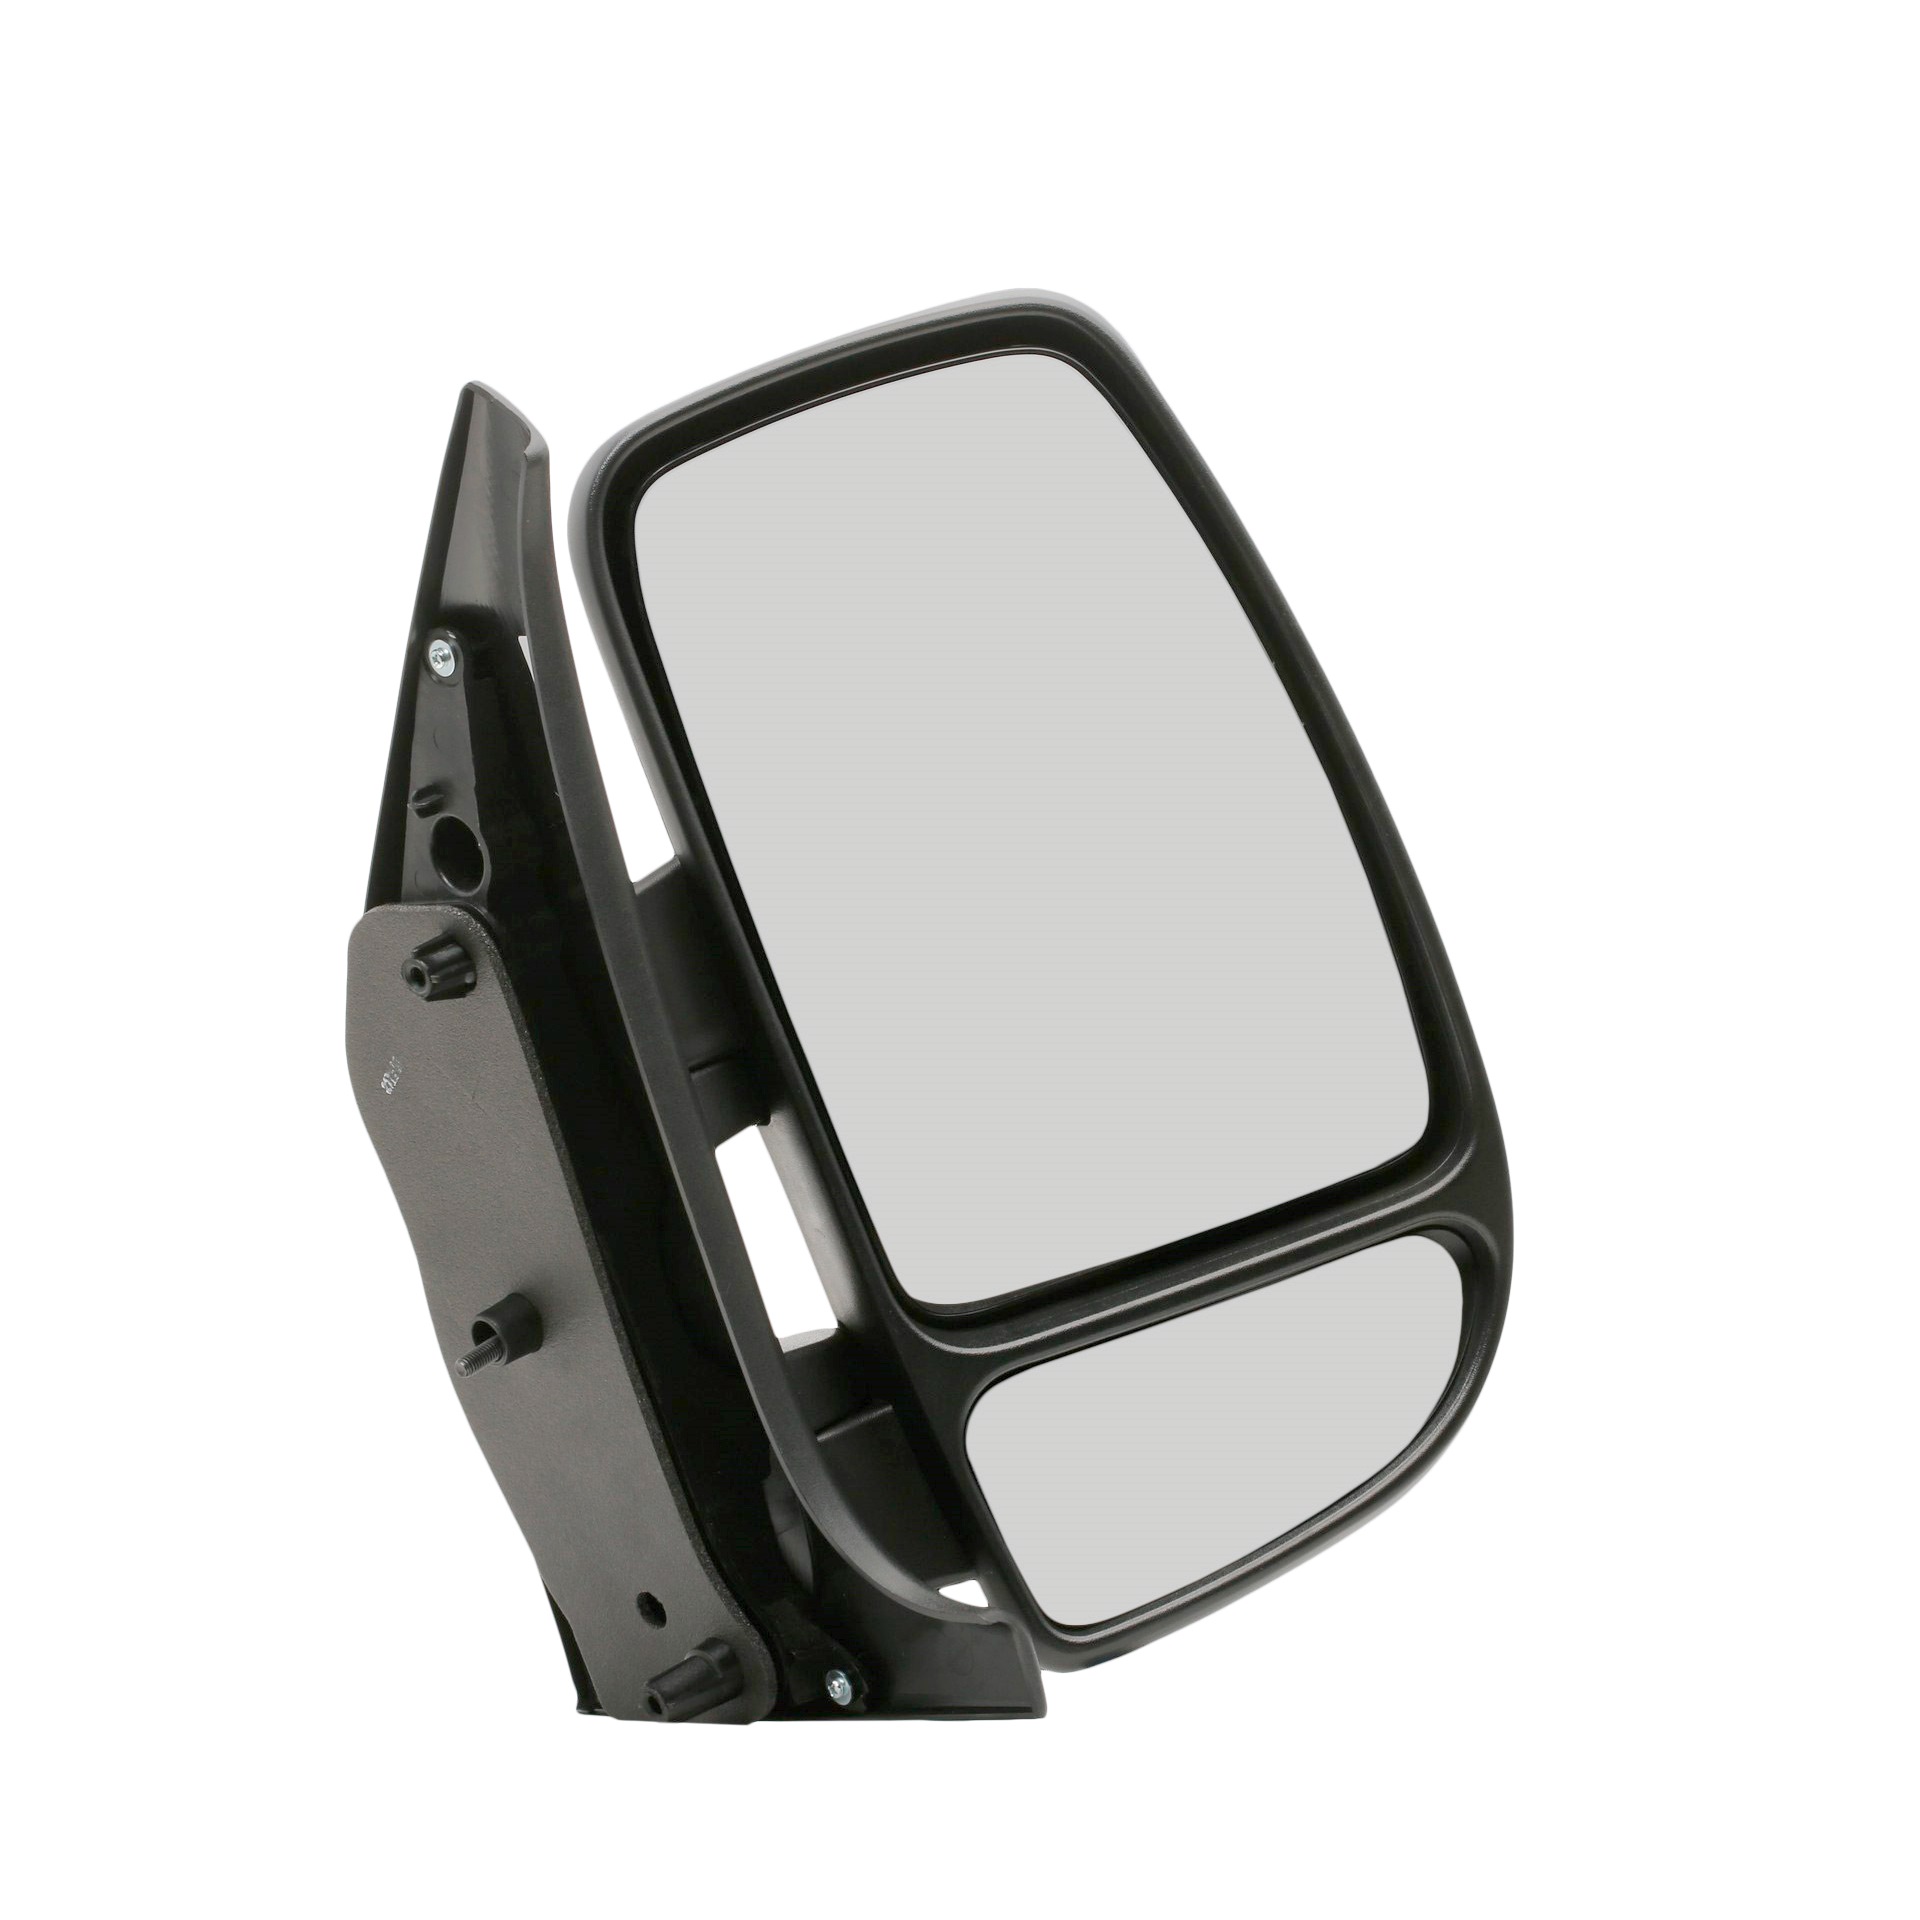 STARK SKOM-1040262 Wing mirror Right, black, Rough, Convex, with wide angle mirror, Complete Mirror, for manual mirror adjustment, Short mirror arm